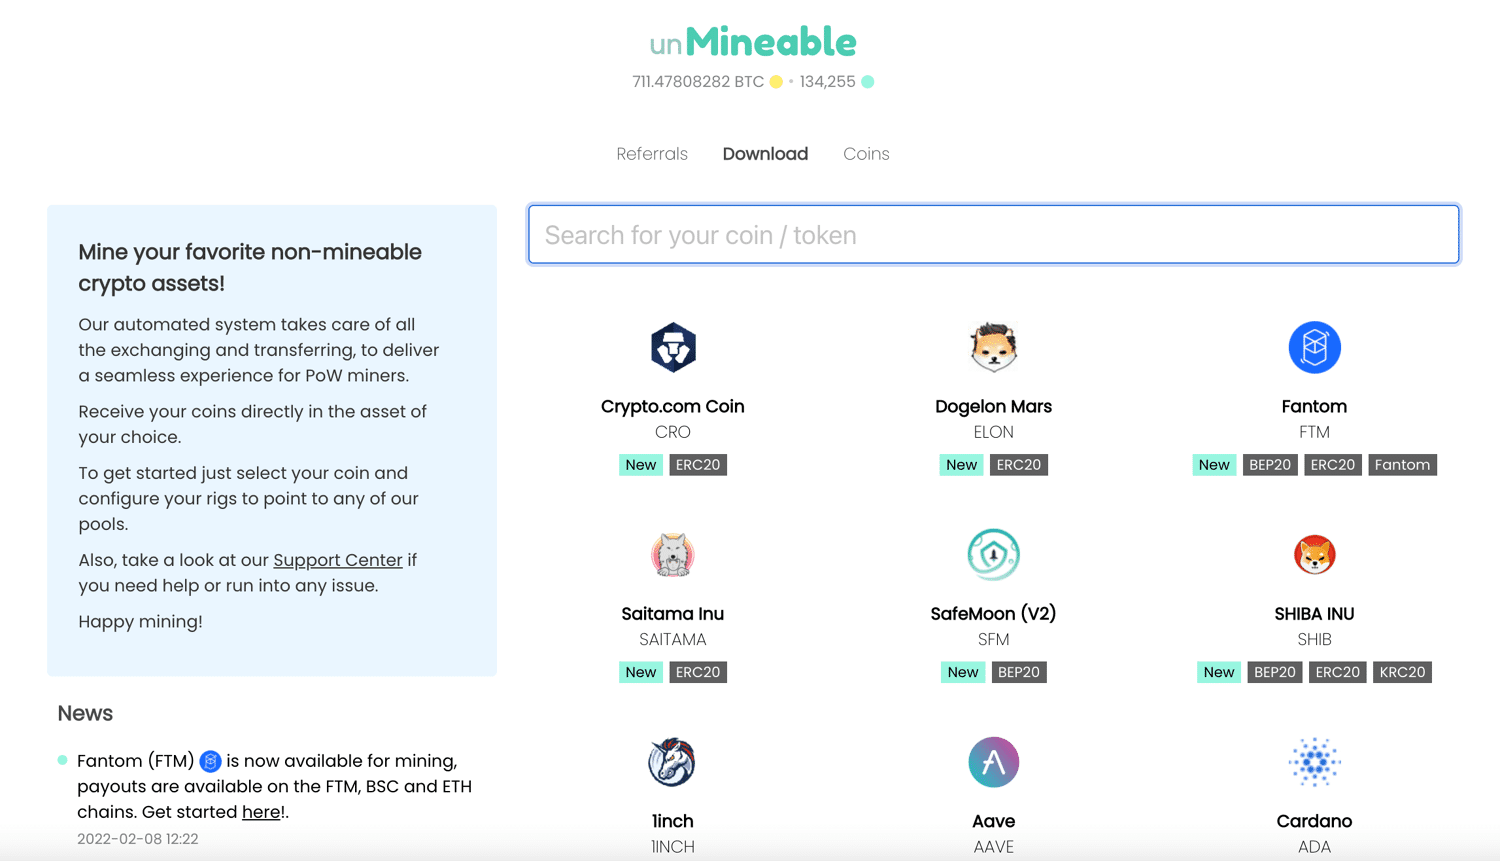 Start Mining Nearly Any Crypto Coin with unMineable